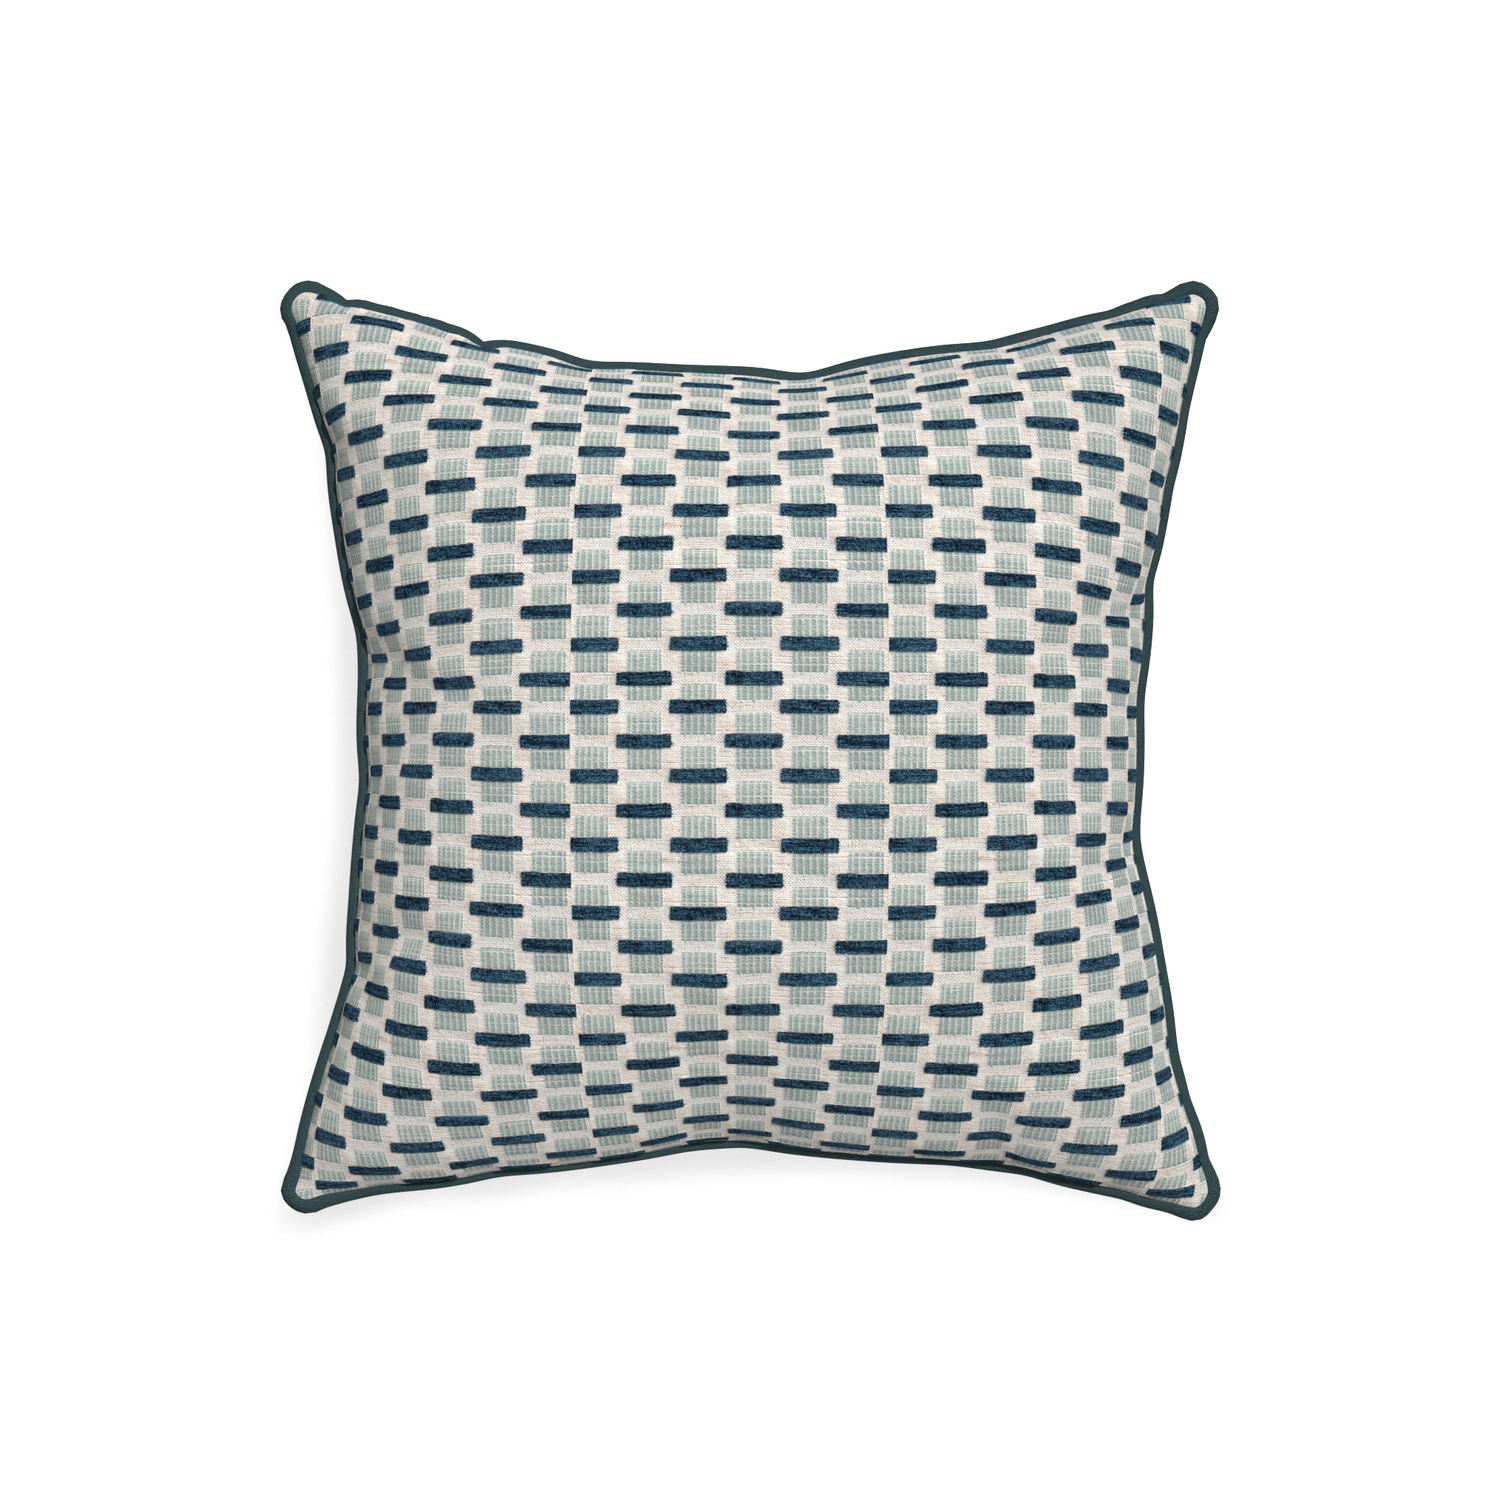 20-square willow amalfi custom blue geometric chenillepillow with p piping on white background